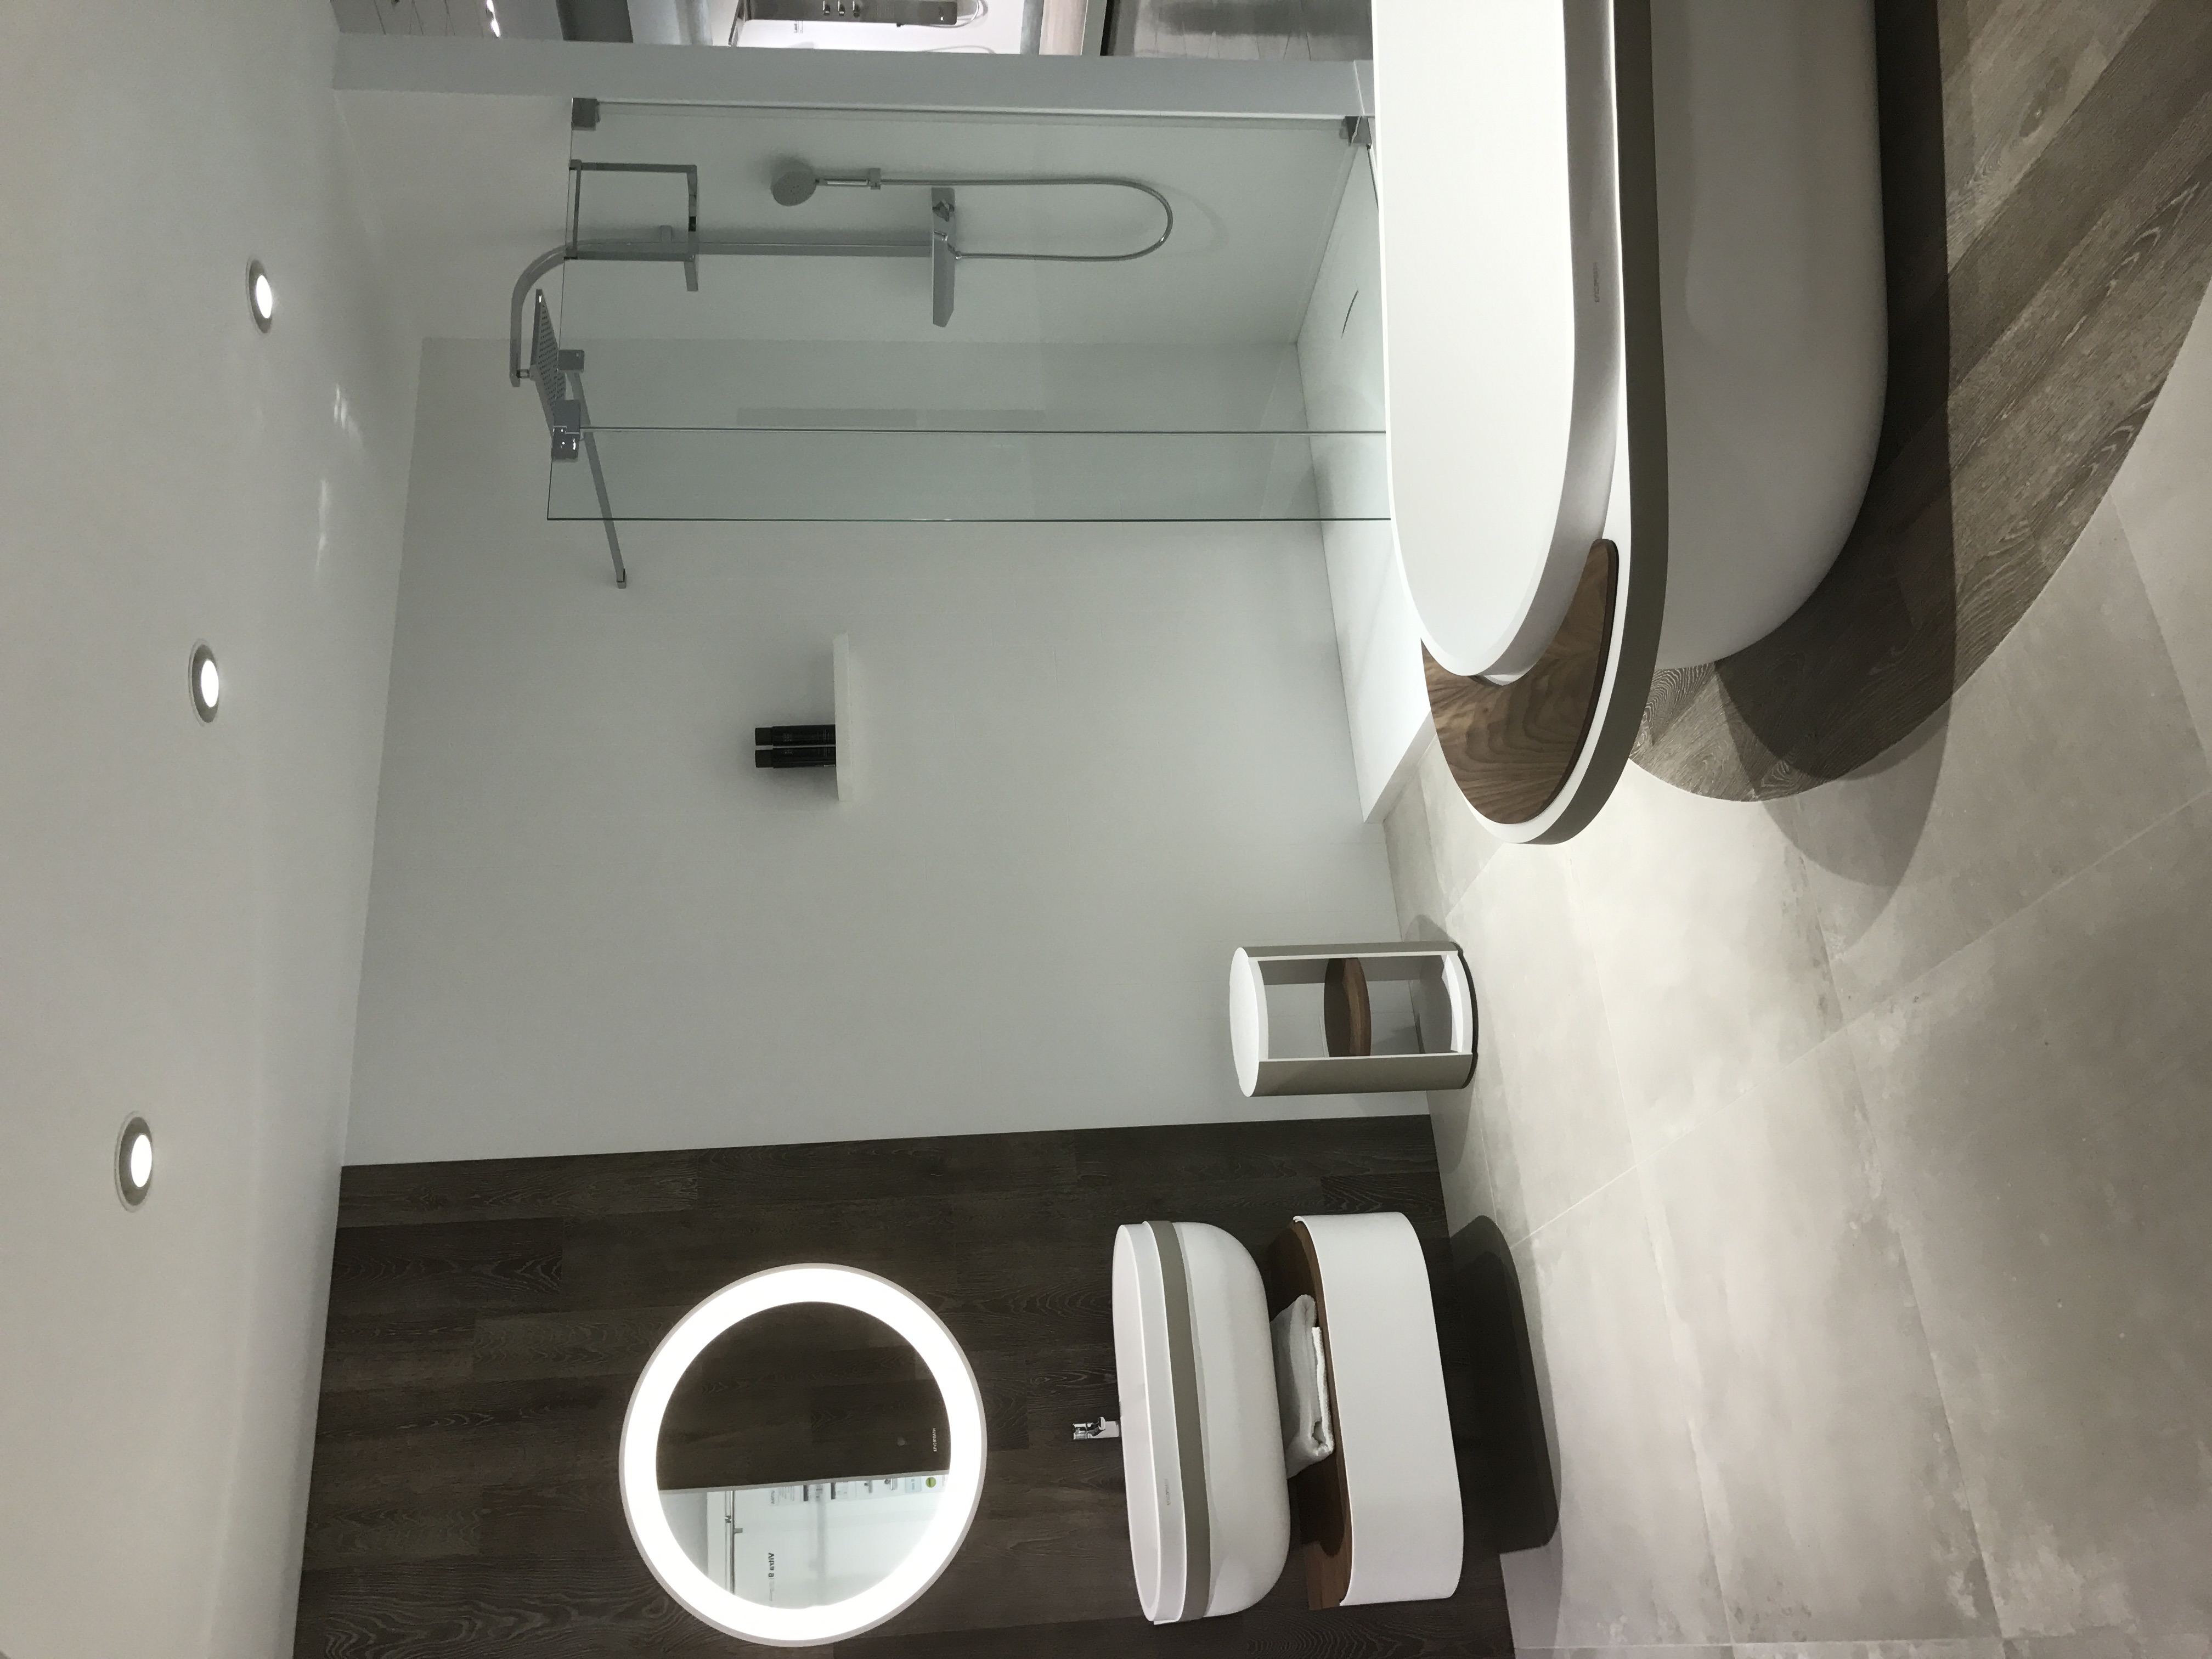 Modenr bathroom collection with KRION and wood